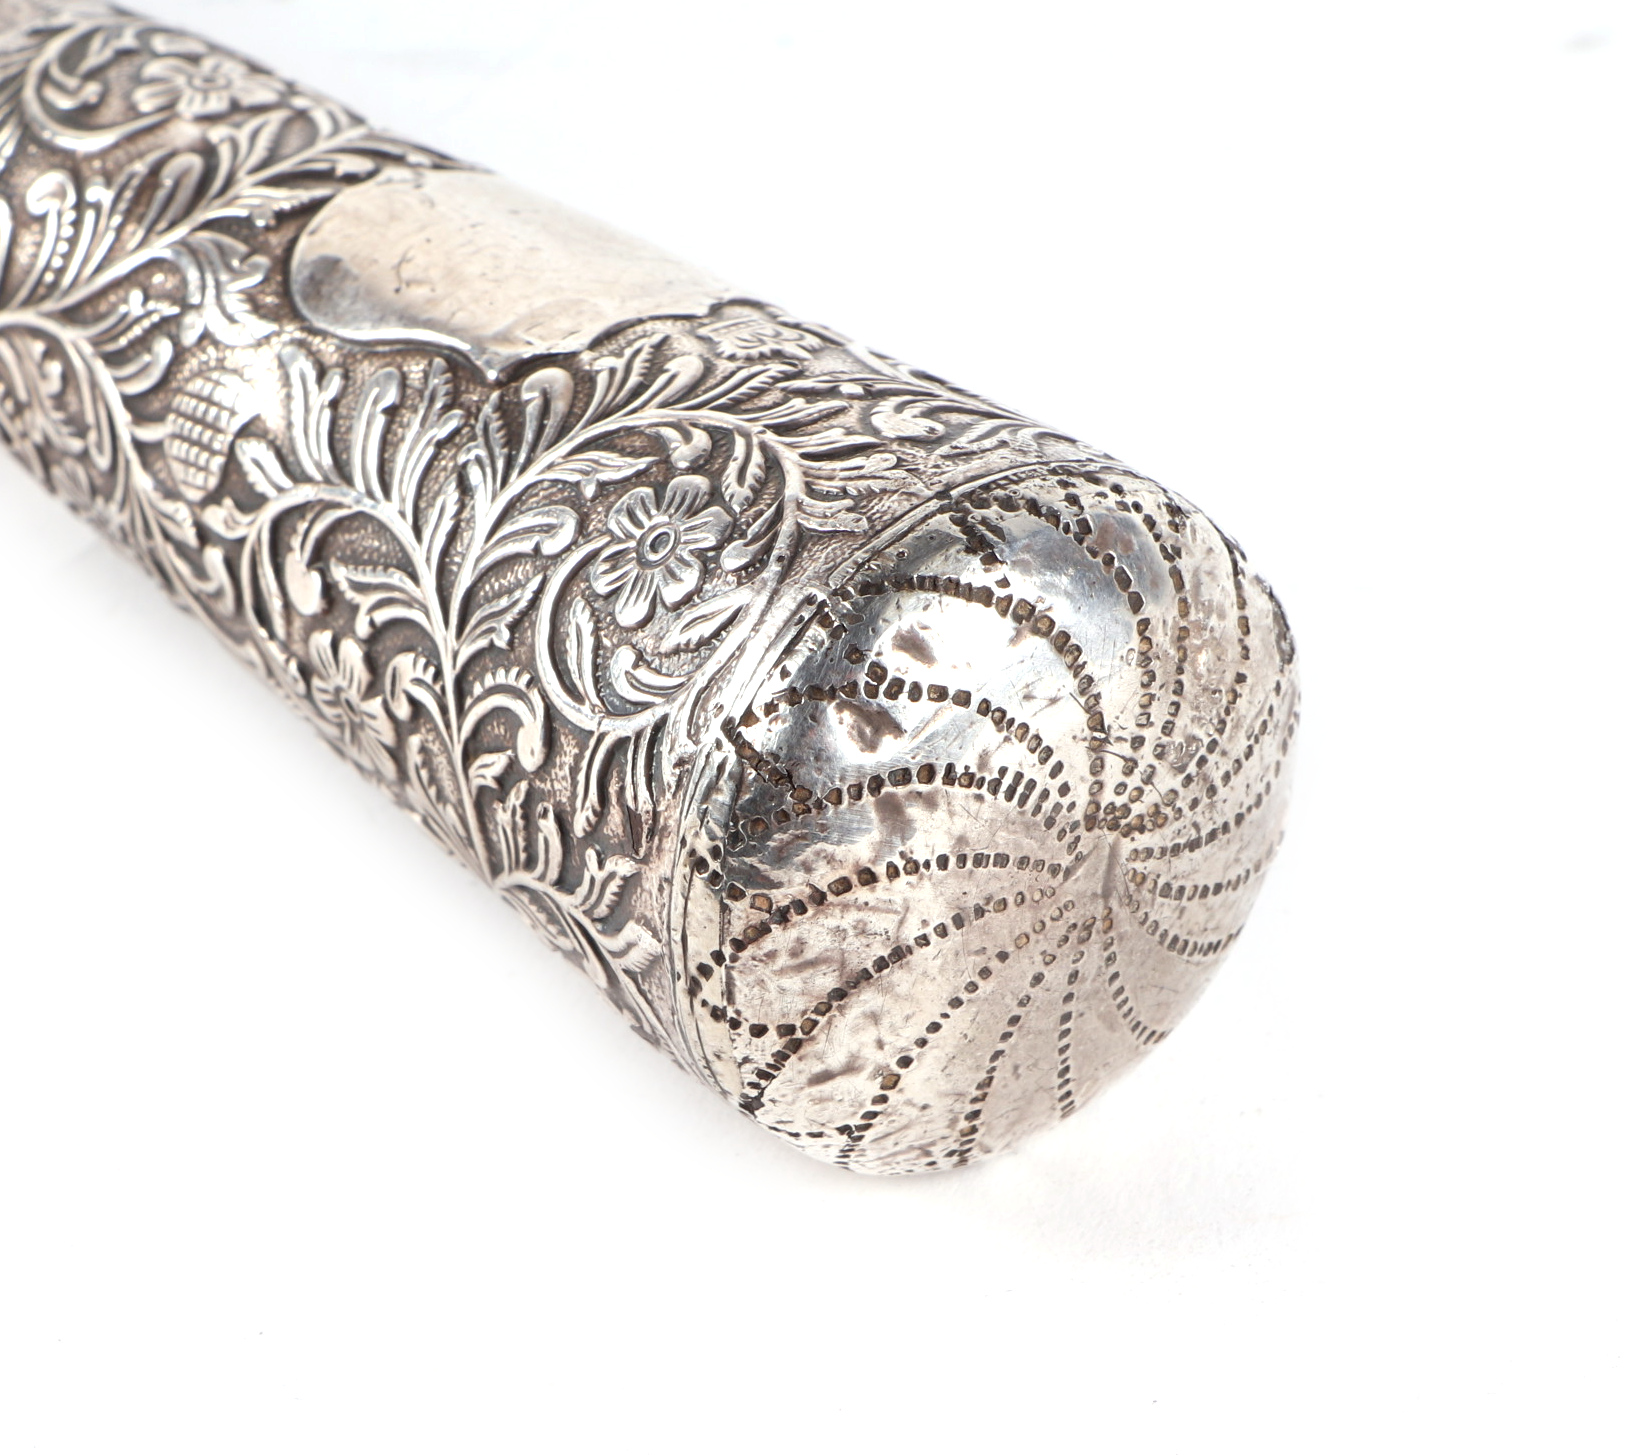 A late 19th century Malacca walking stick, with white metal band, ornate white mental handle, 91.5cm - Image 3 of 3